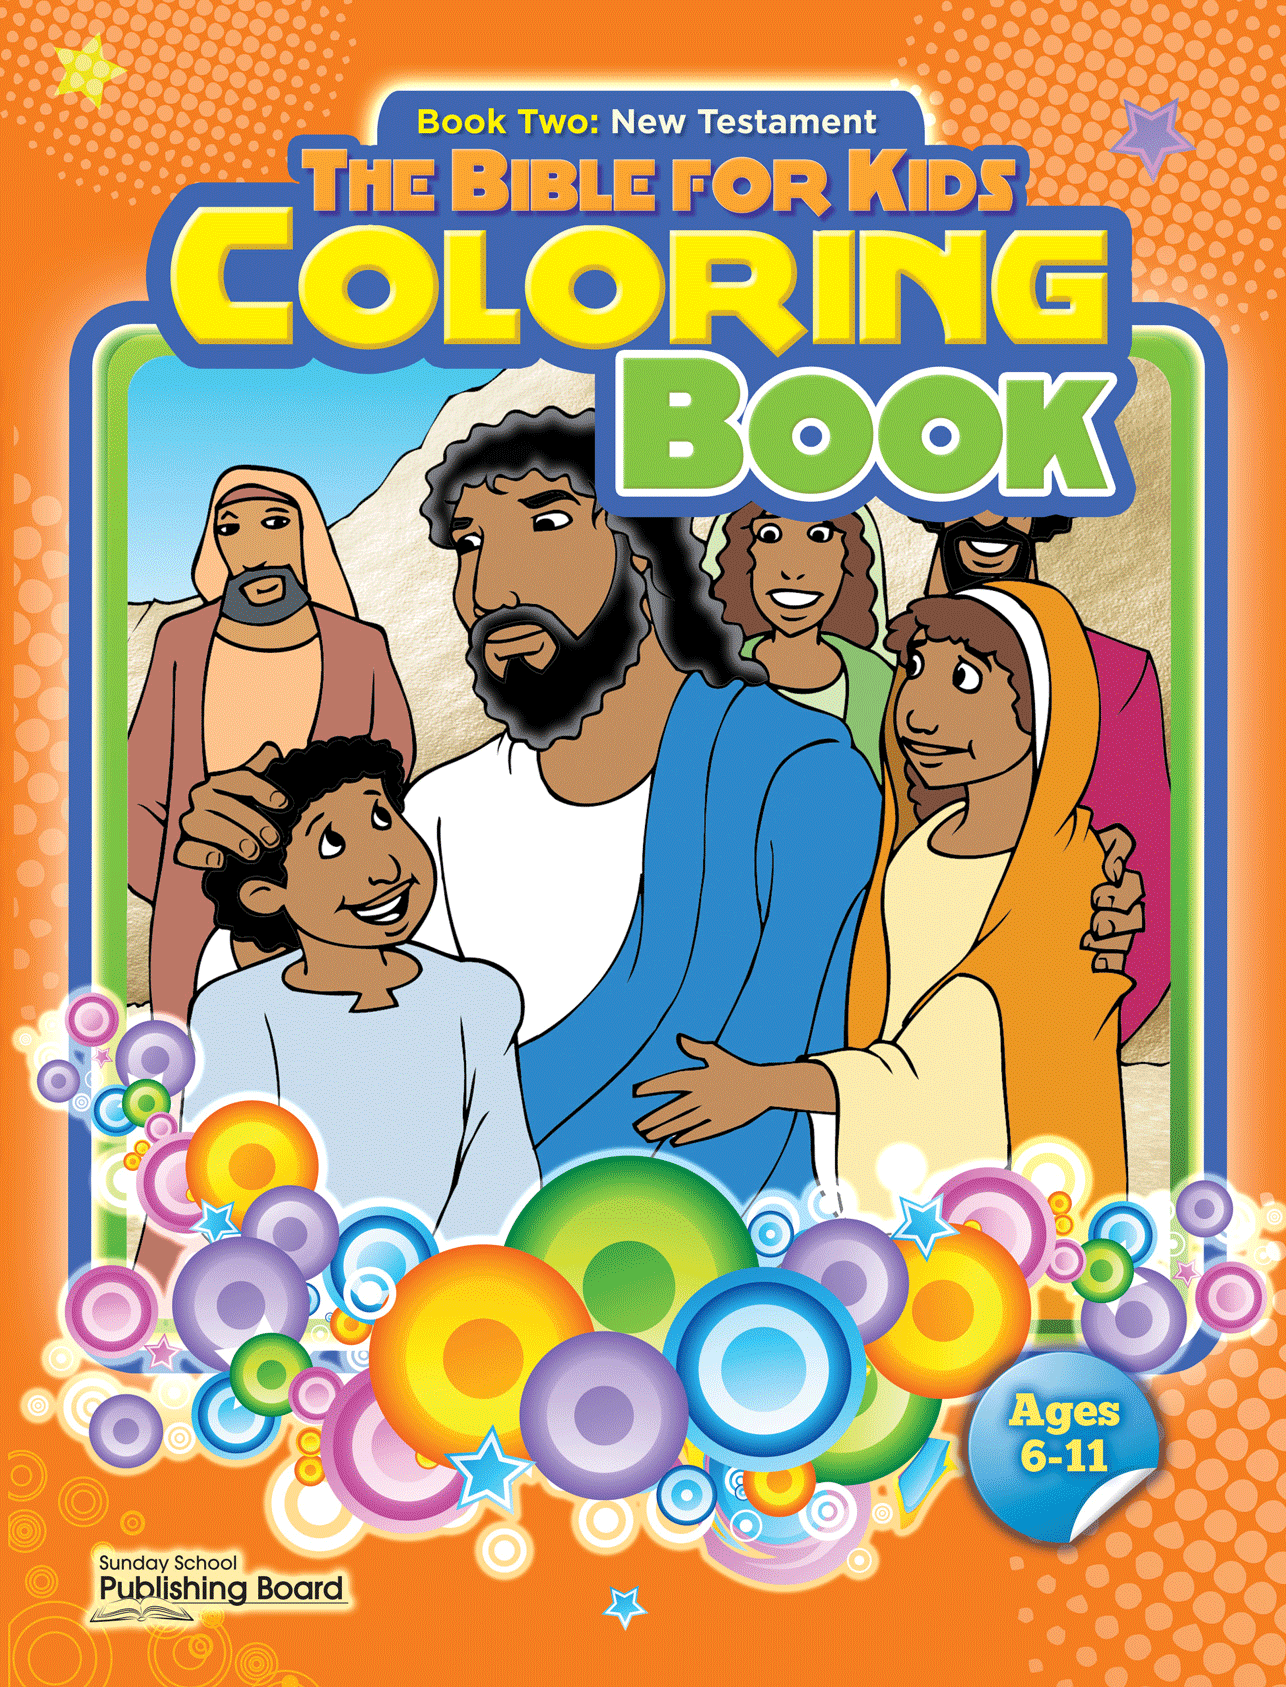 Download The Bible For Kids Coloring Book Book Two New Testament Sunday School Publishing Board